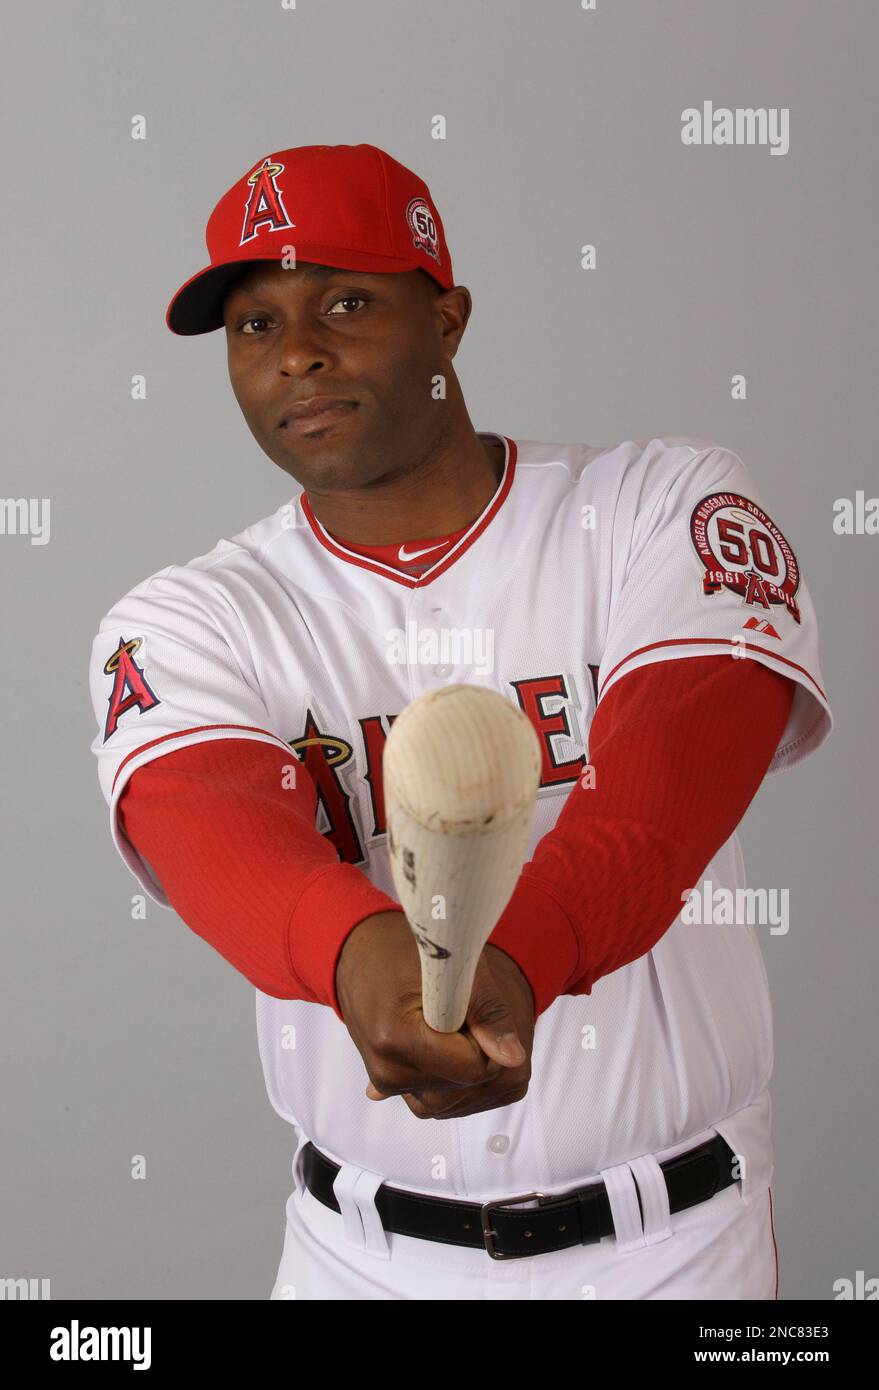 This is a 2011 photo of Torii Hunter of the Los Angeles Angels baseball  team. This image reflects the Los Angeles Angels' active roster as of  Monday, Feb. 21, 2011 when this